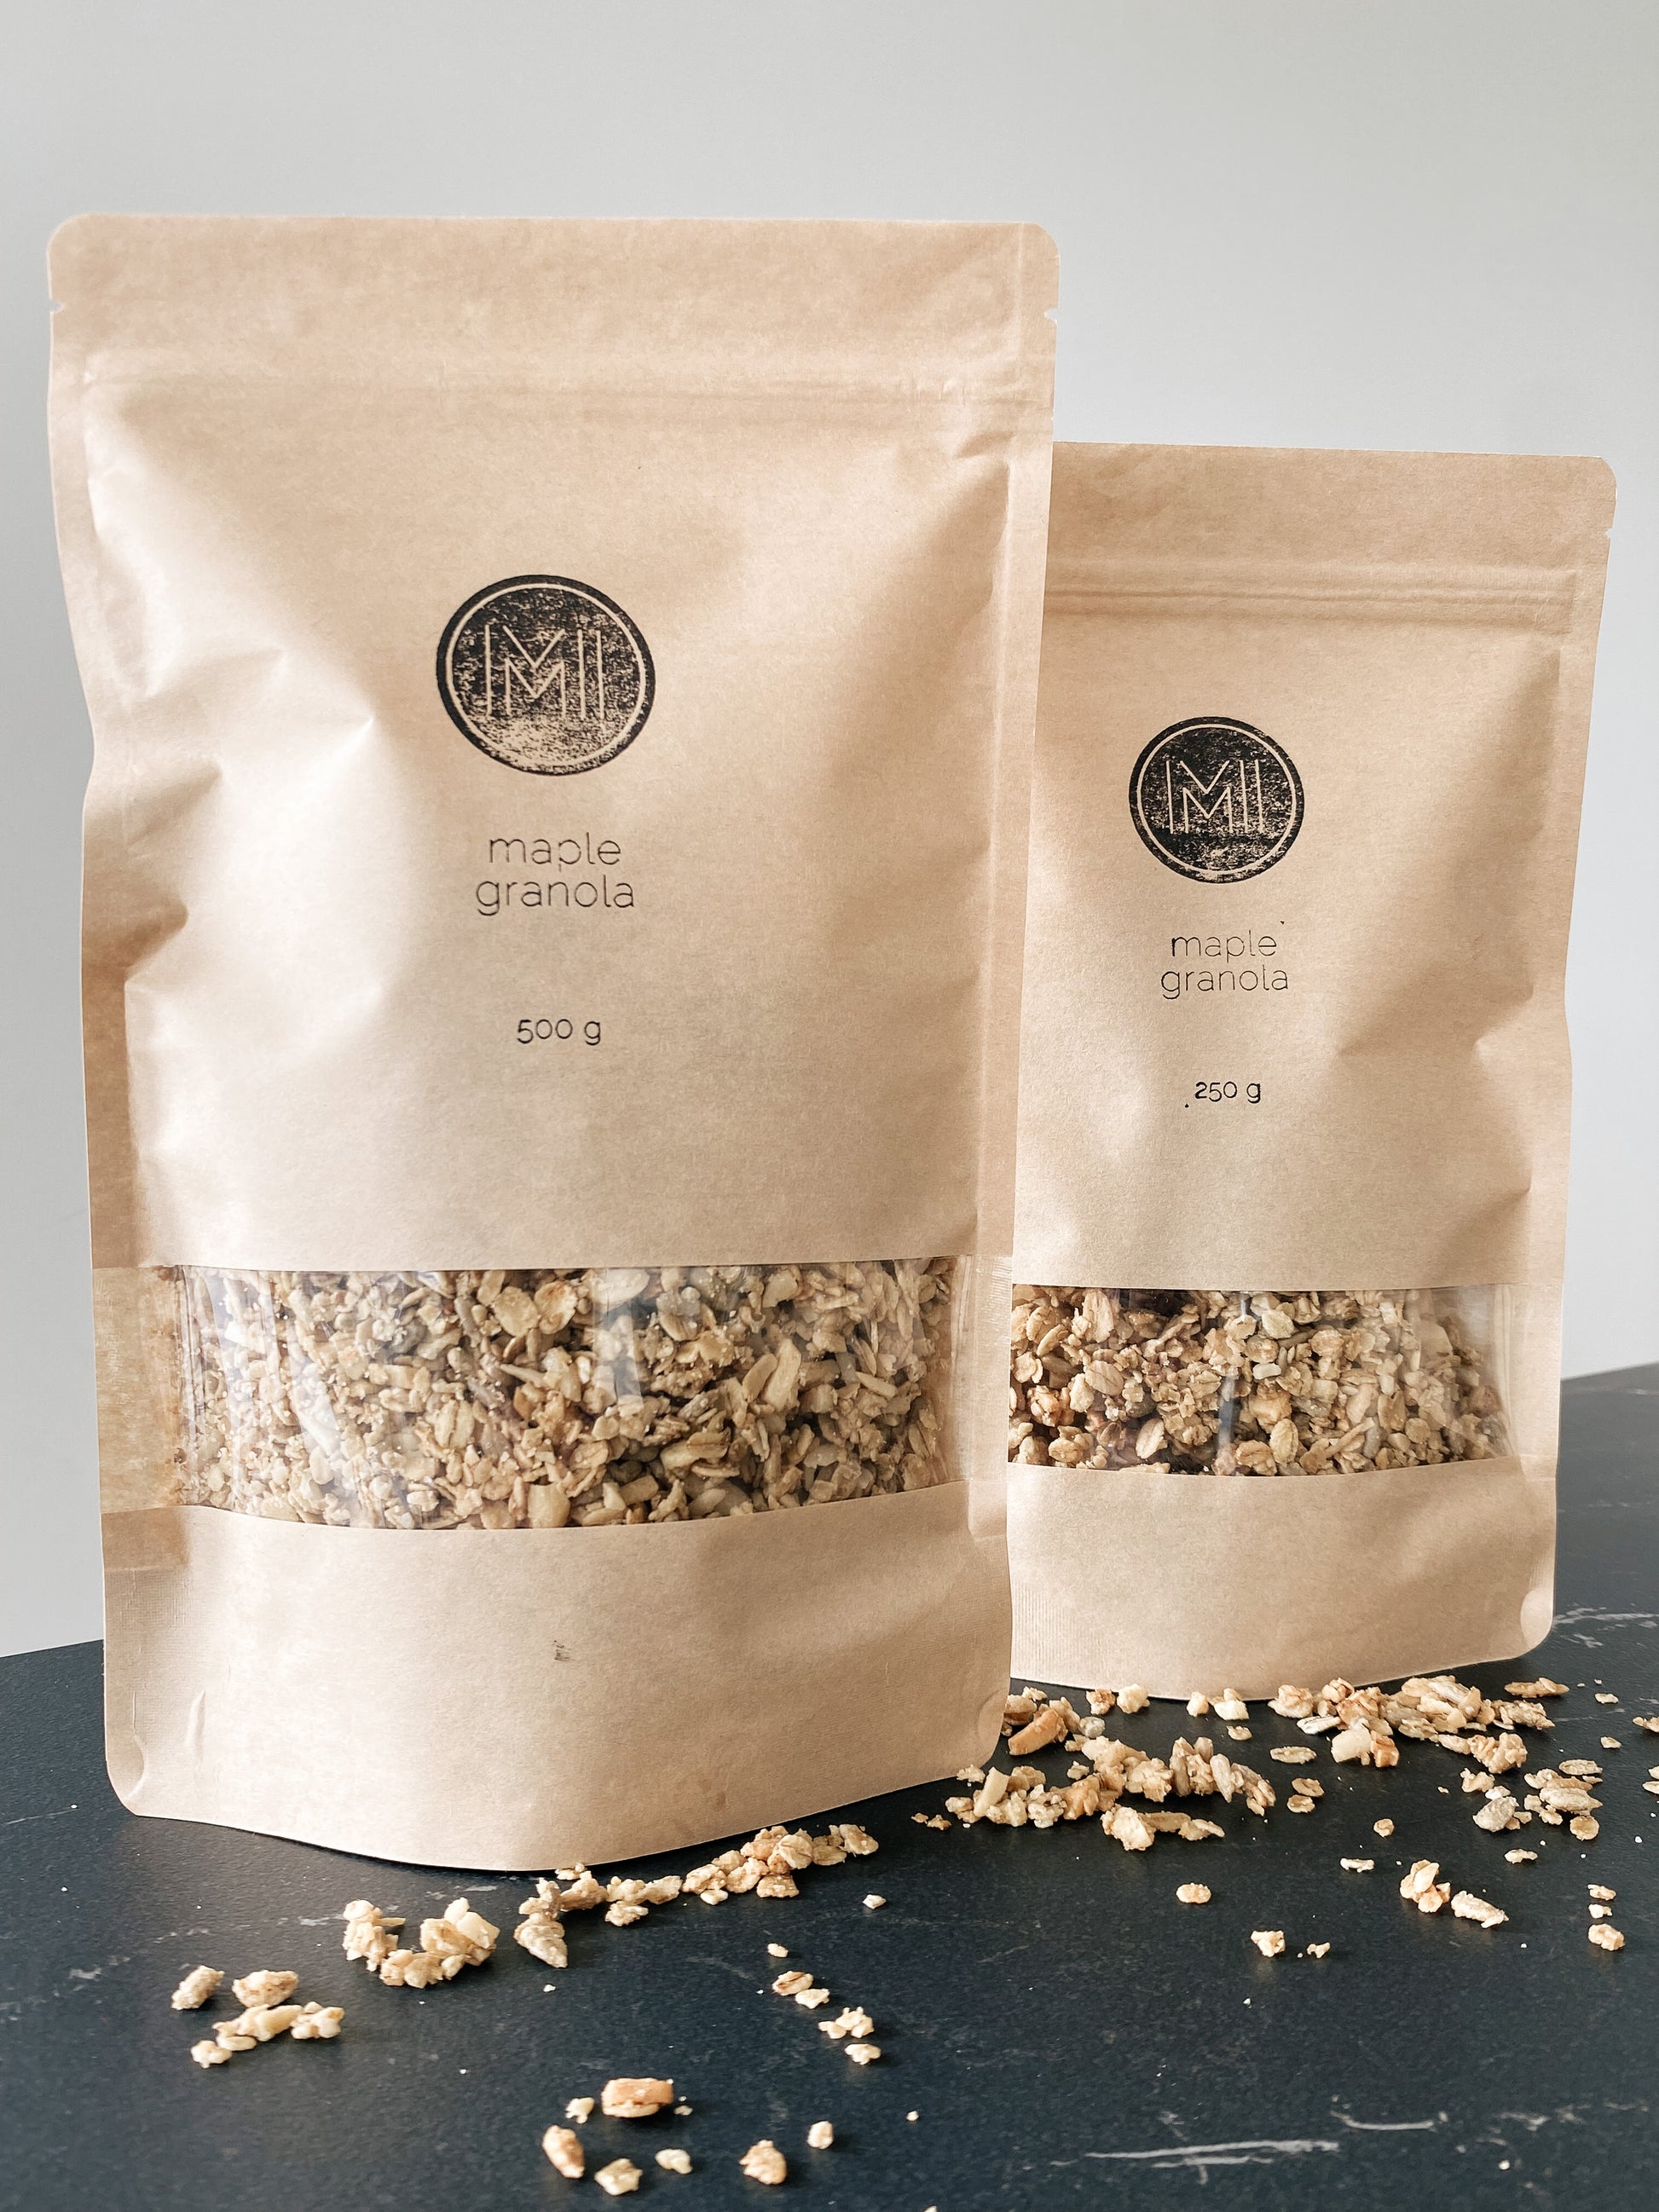 2 sizes paper bags (250g and 500g) with granola and granola sample on a counter top